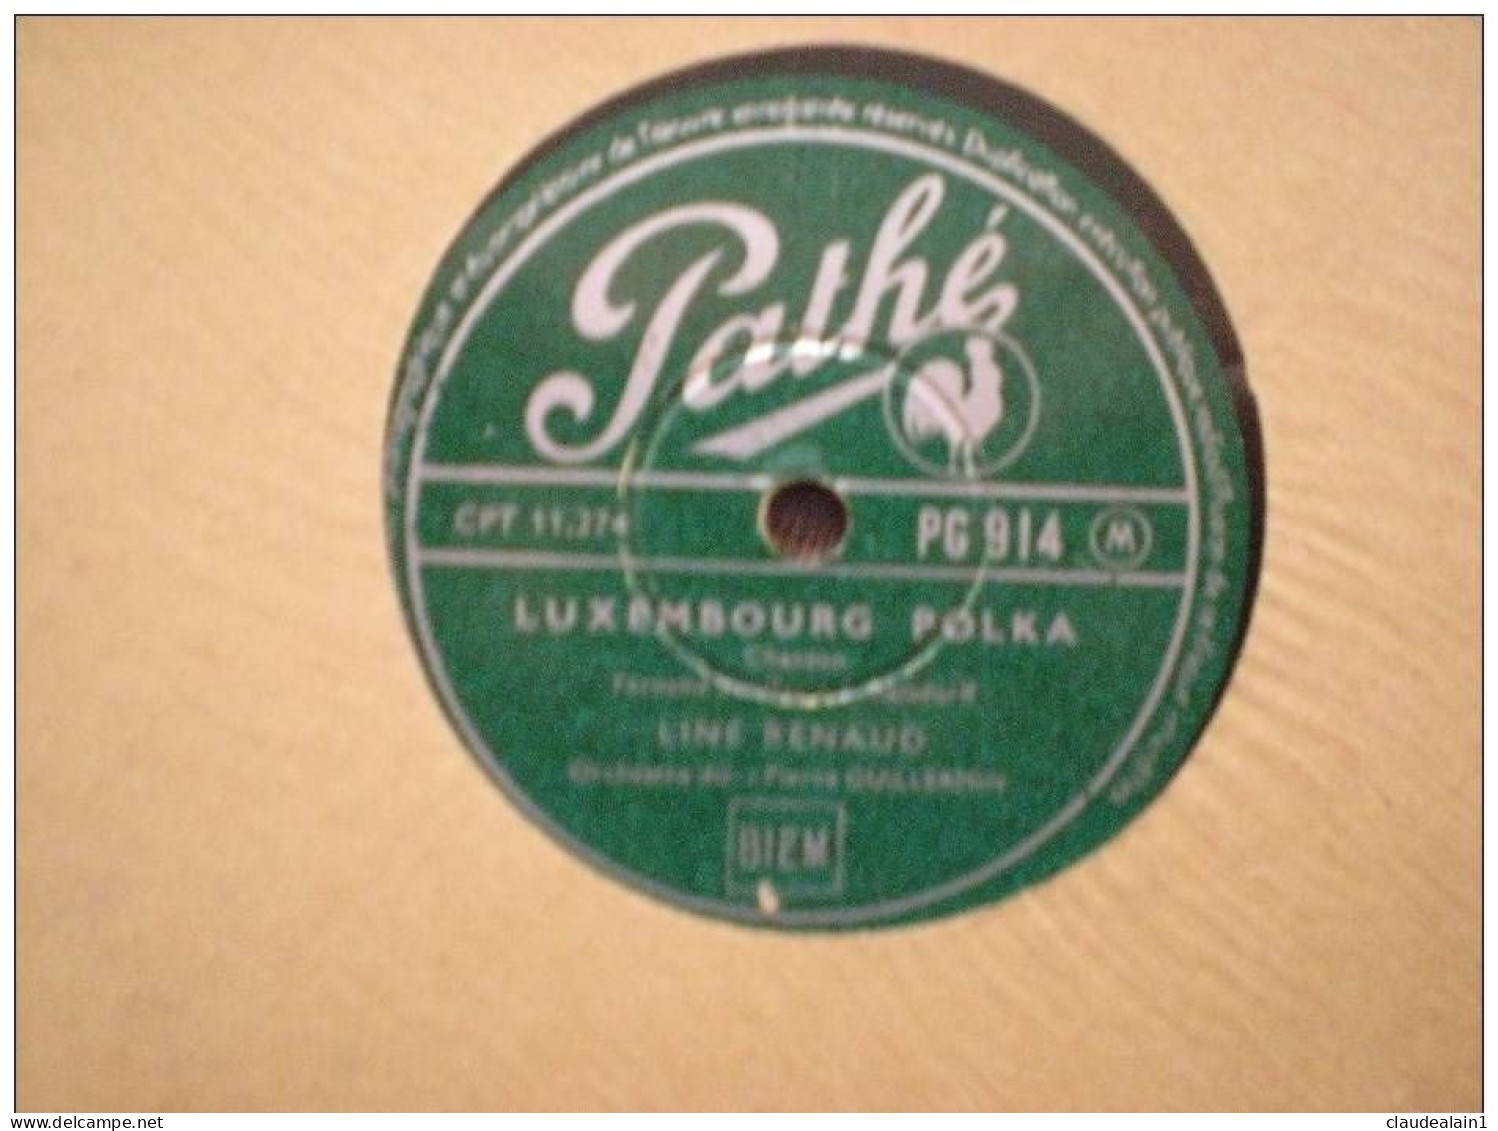 DISQUE PATHE VINYLE 78T - LINE RENAUD - LUXEMBOURG POLKA - PROTEGE-MOI - 78 Rpm - Gramophone Records